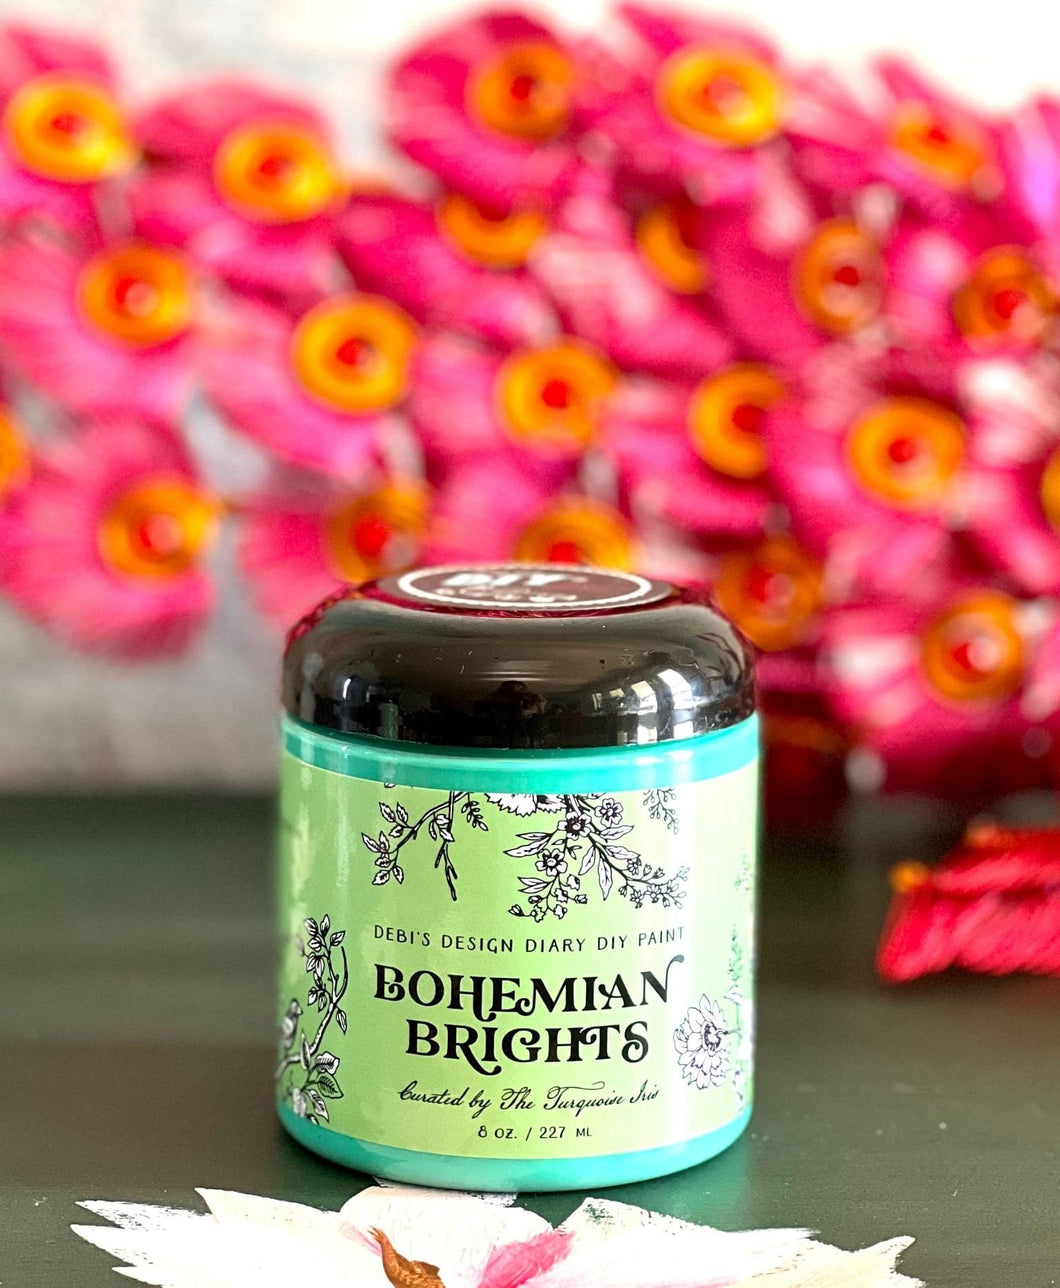 Wandering Heart- Bohemian Brights  - Created by the Turquoise Iris for DIY PAINT - New Product